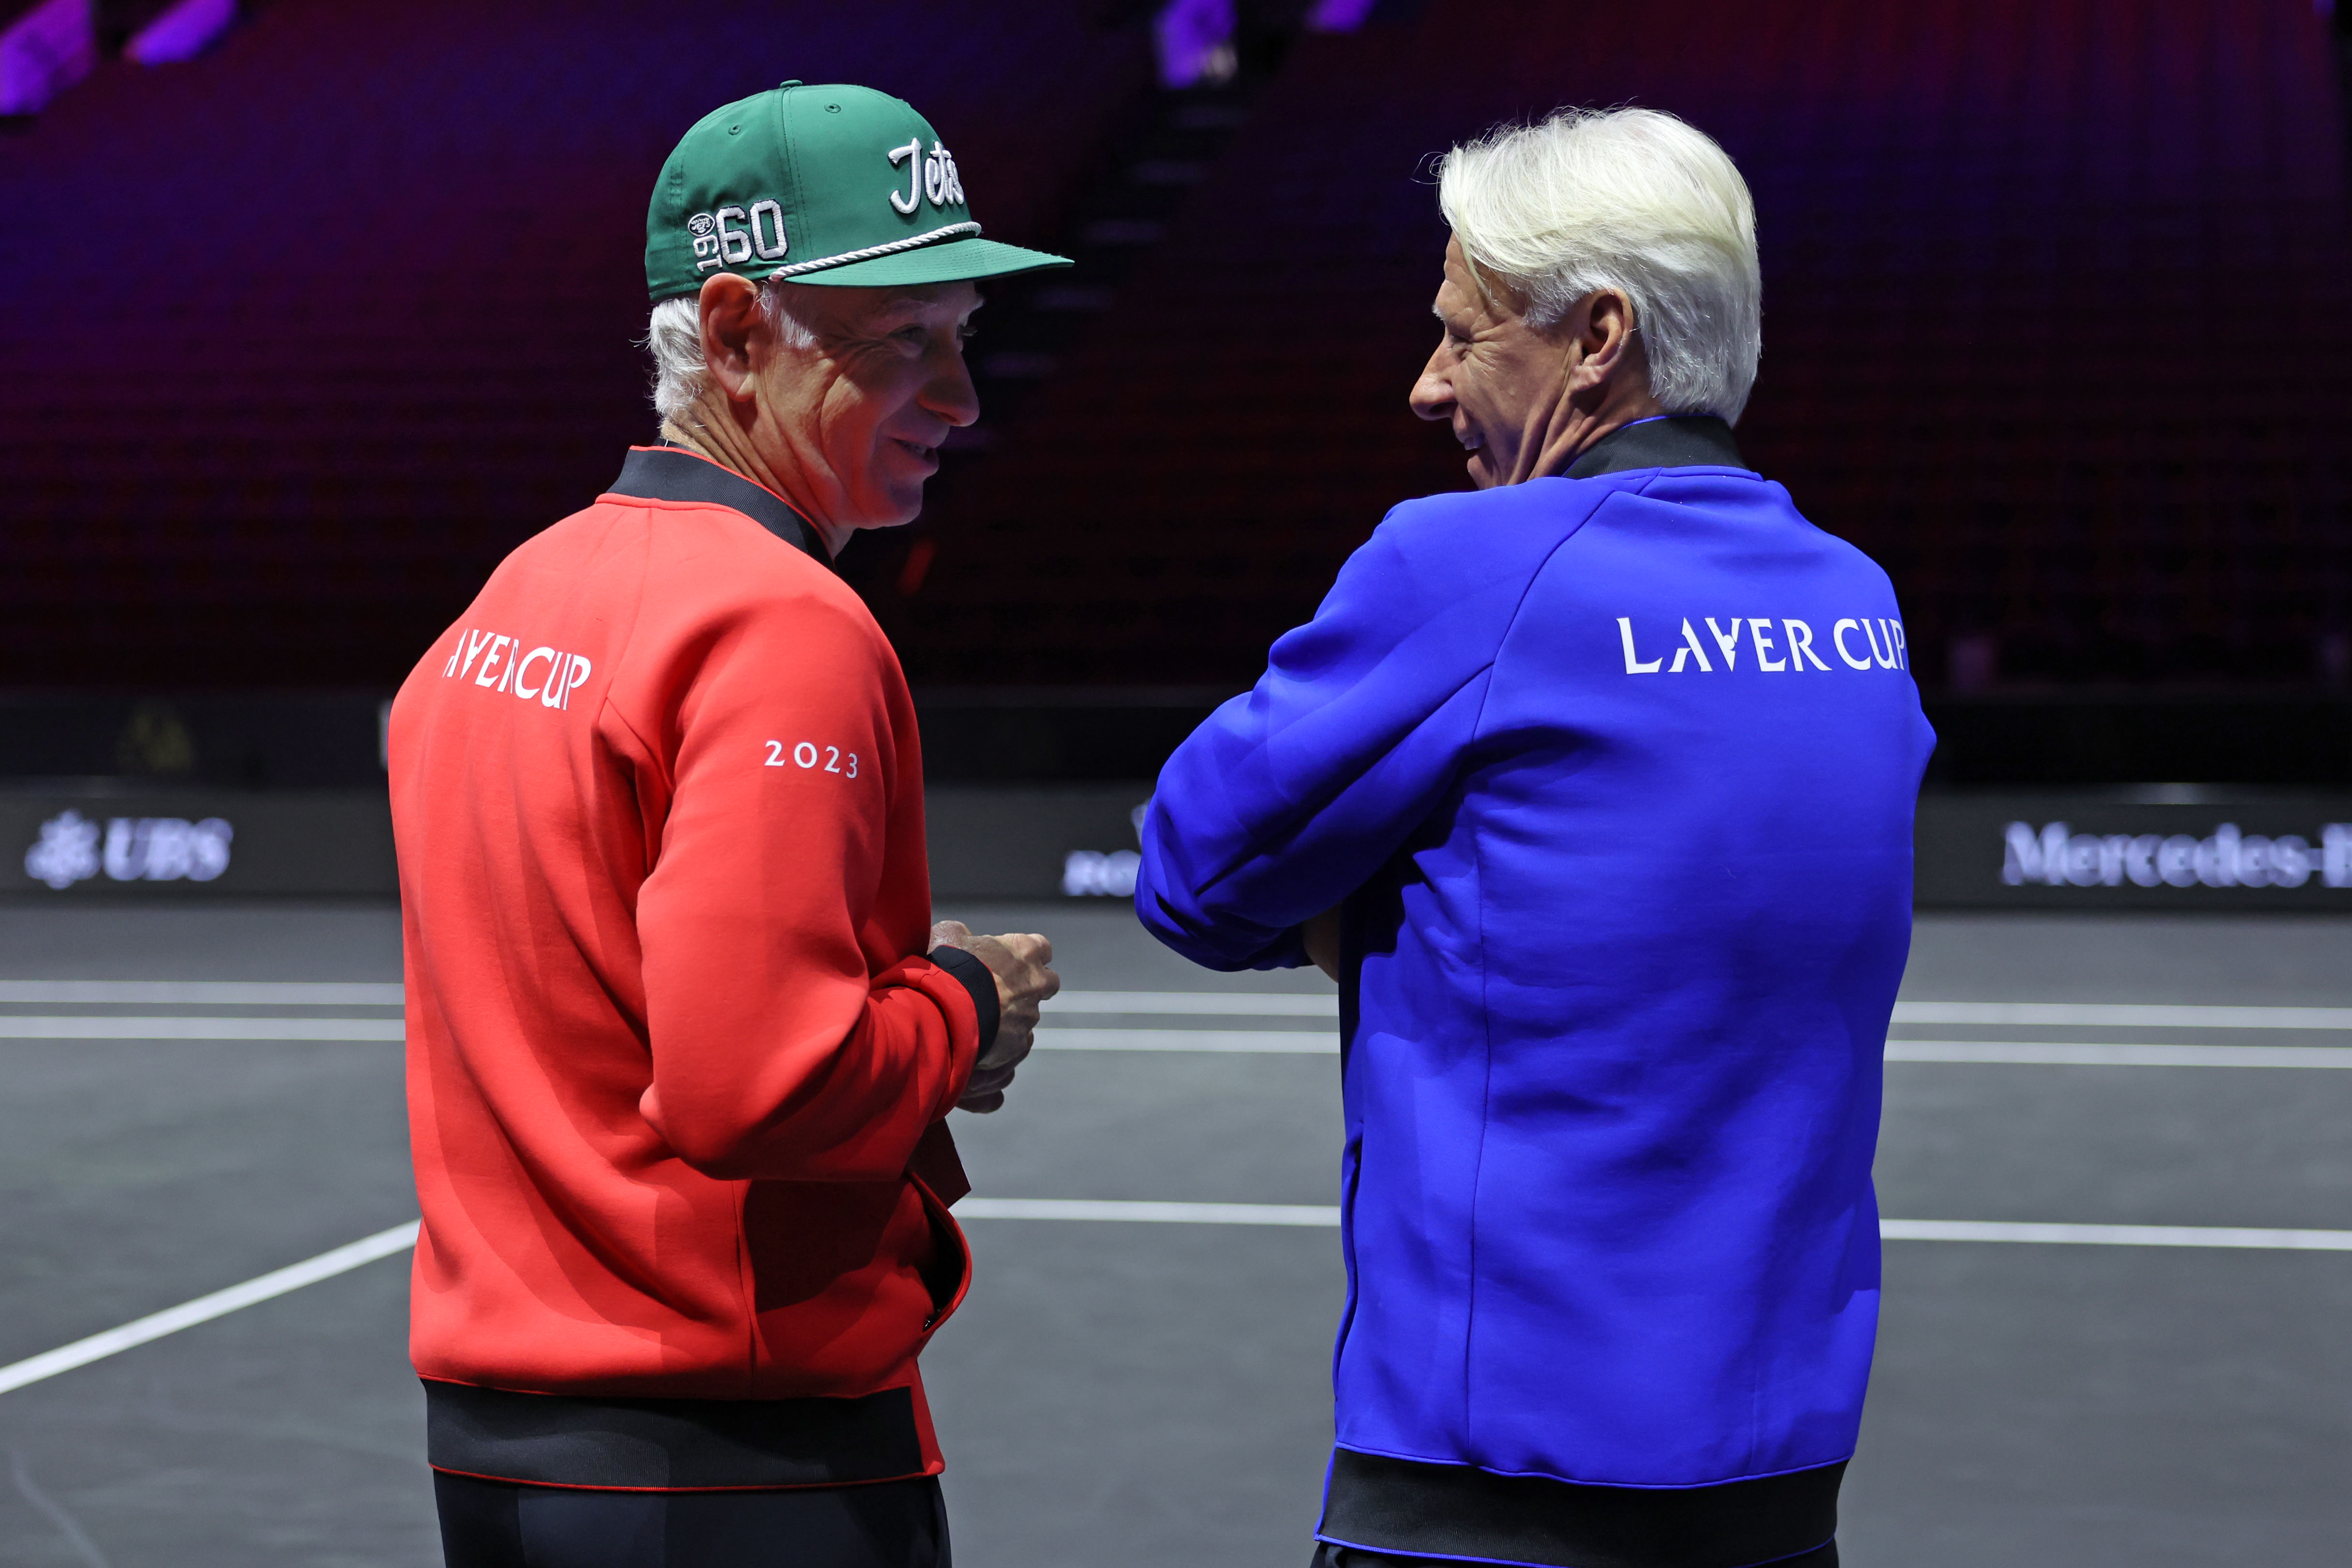 Laver Cup VI Whos new? Who has something to prove? Whos going to win?